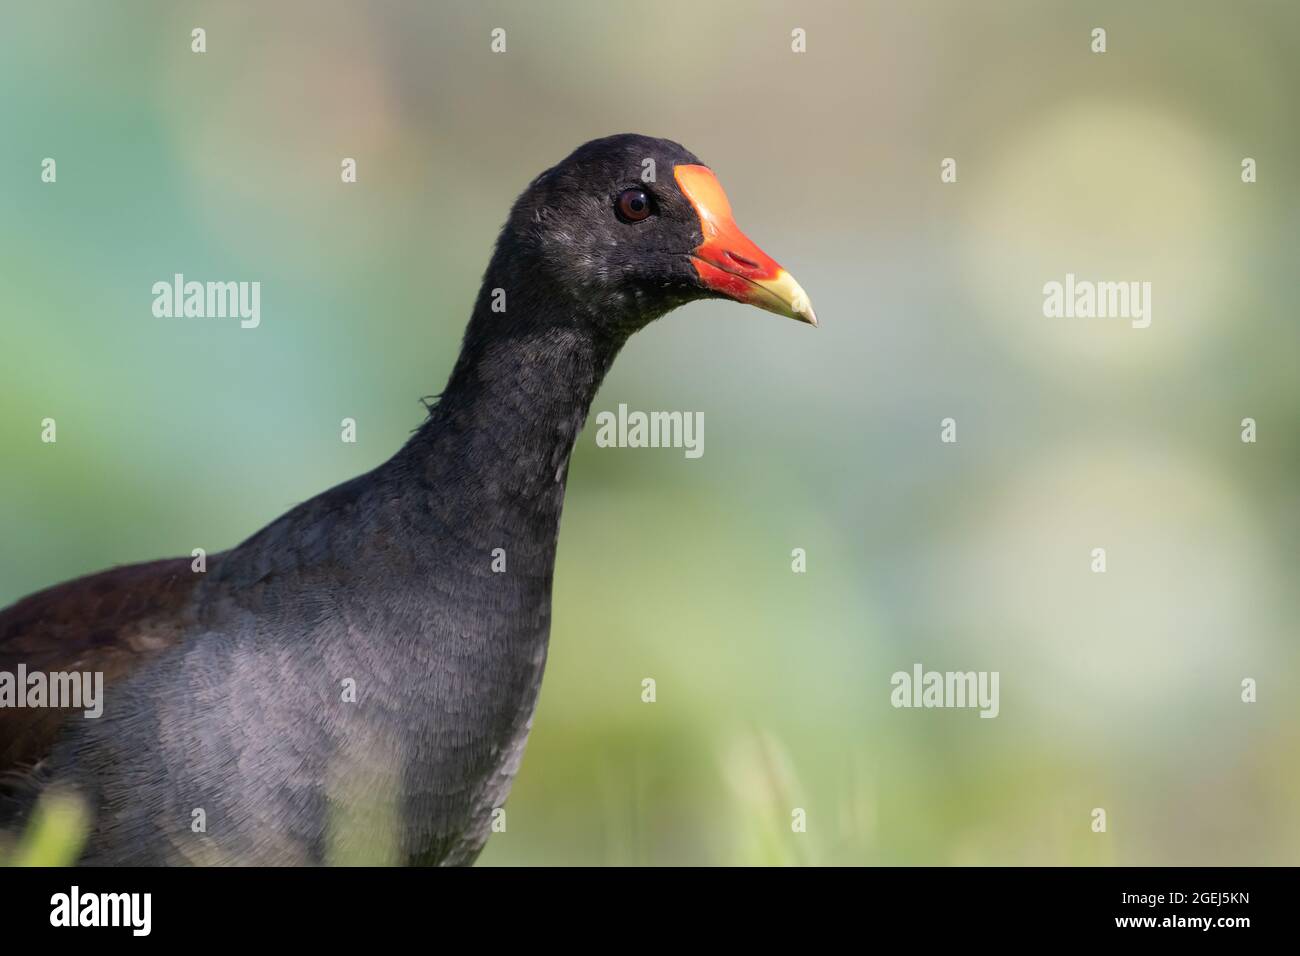 A portrait of a common gallinule, seen near Leesburg, Florida. Stock Photo